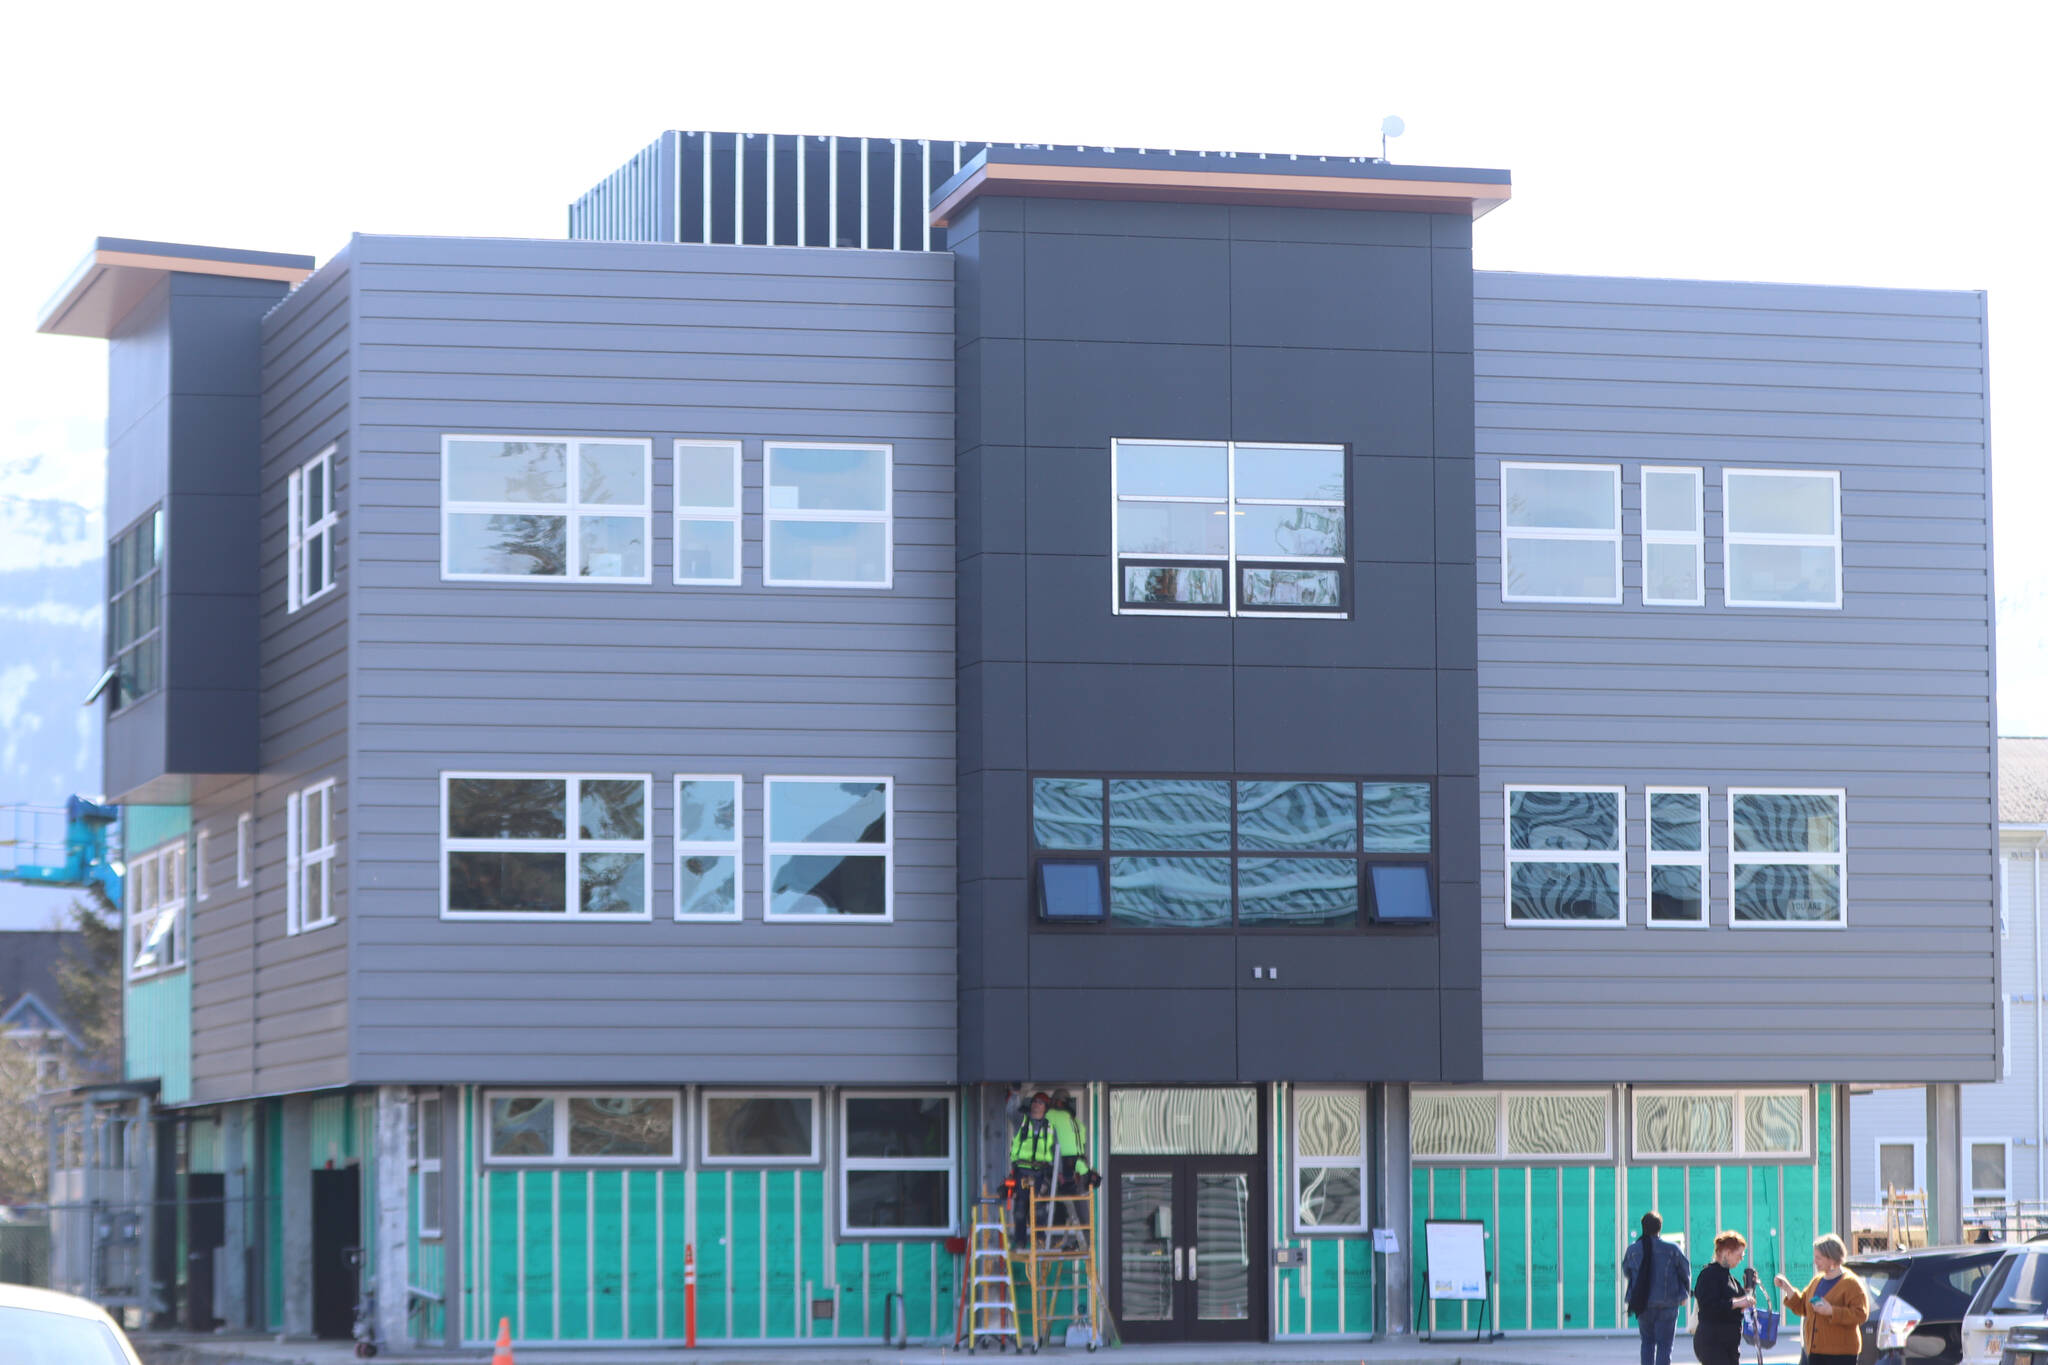 Teal Street Center located at 1187 Teal Street in the Mendenhall Valley is currently open to the public to provide services to Juneau residents despite minor construction still in progress. (Jonson Kuhn / Juneau Empire)